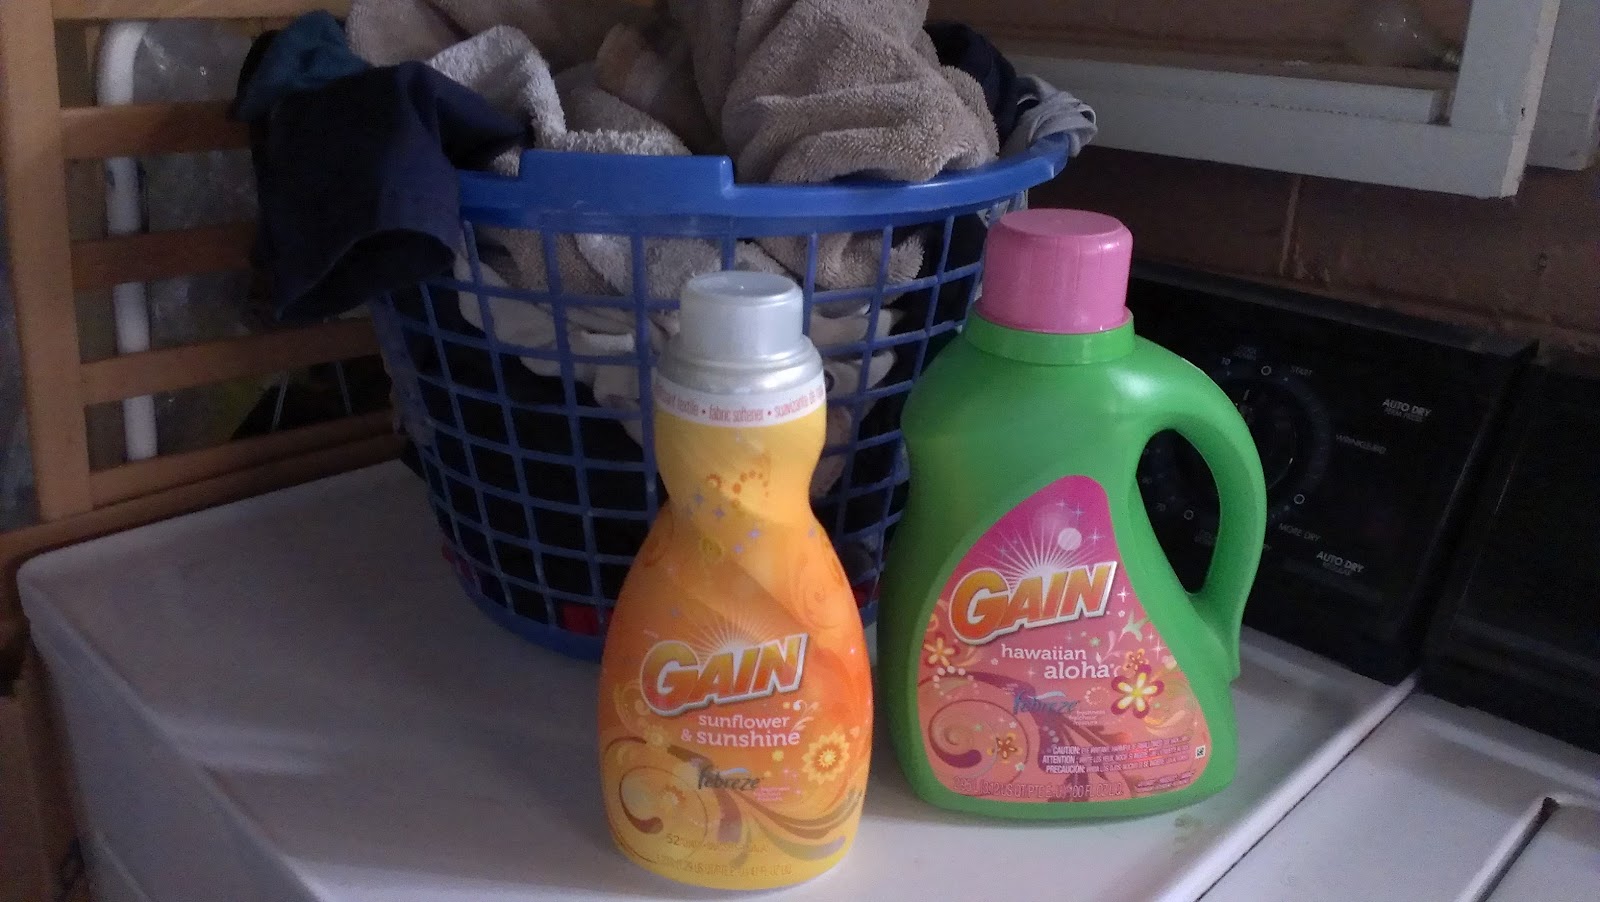 Free Is My Life Review Gain Scented Laundry Products Give Your Clothes A Subtle Clean Fragrance